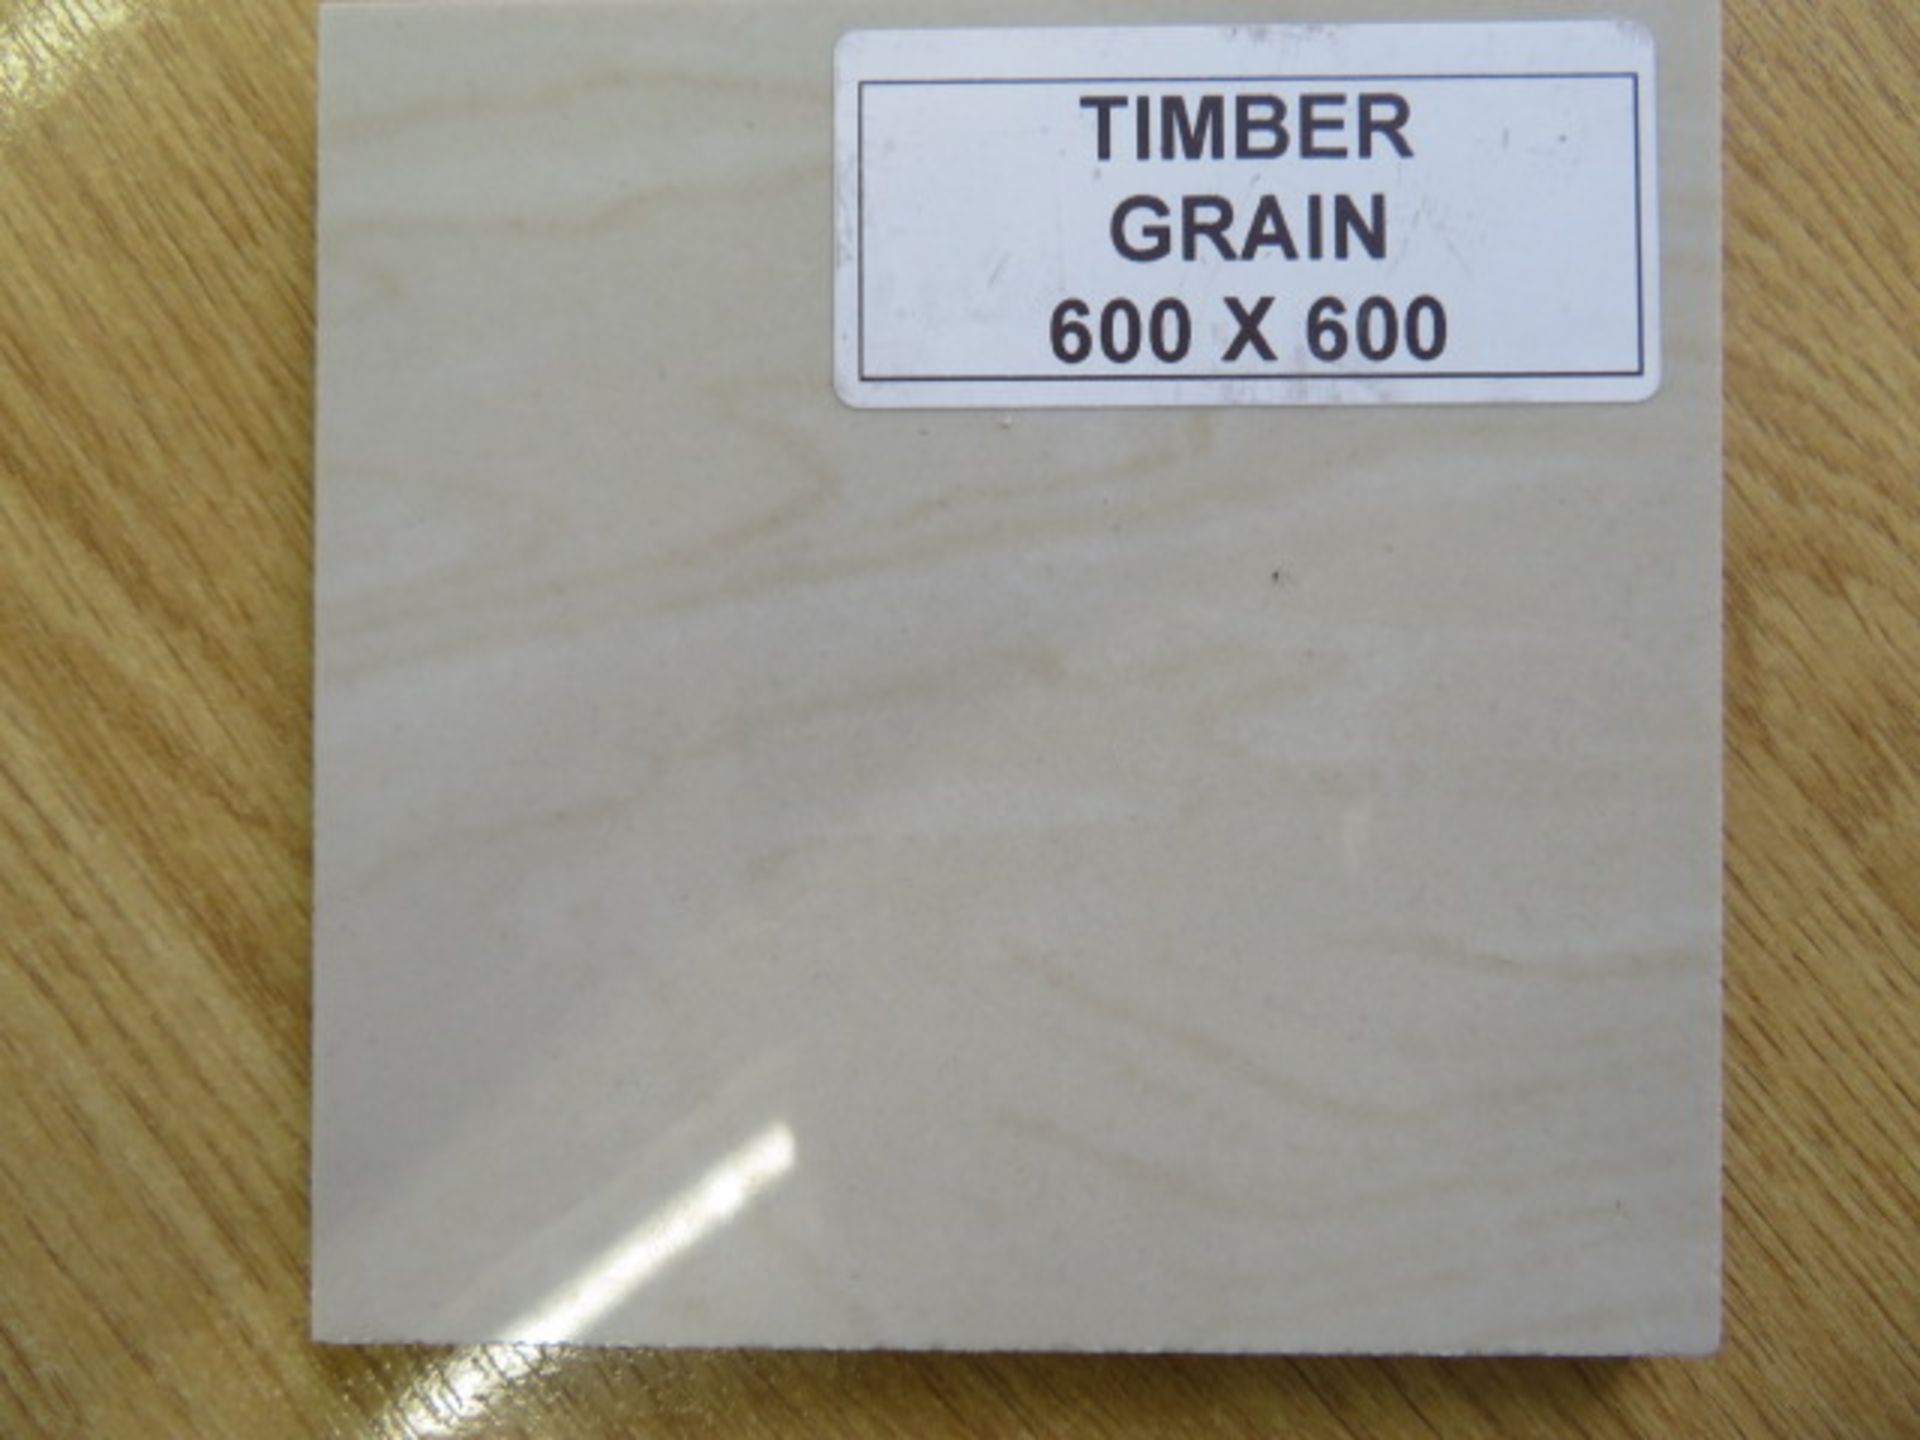 NEW 8.64 Square Meters of Timber Grain Wall and Floor Tiles. 600x600mm per tile. 10mm thick. Th... - Image 2 of 4